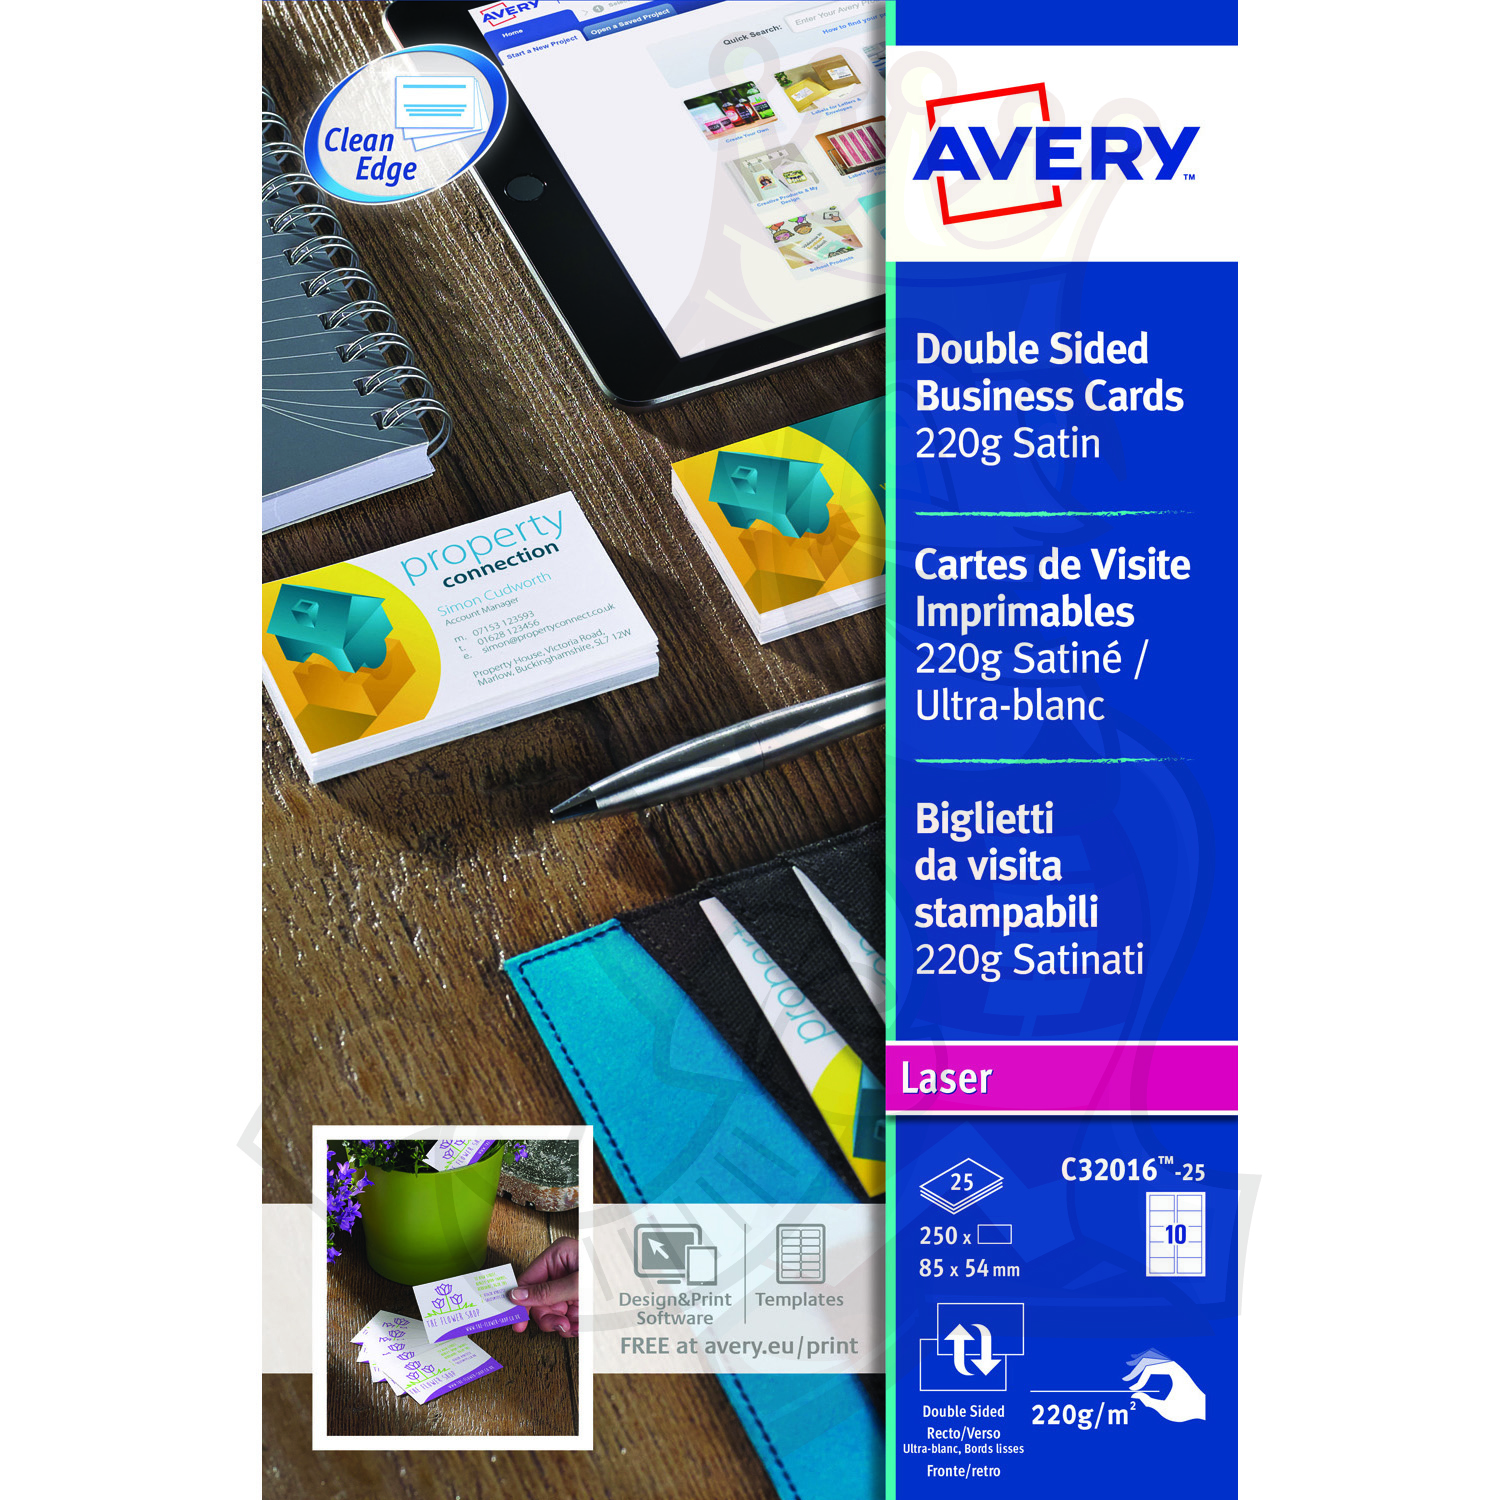 avery-business-cards-double-sided-satin-c32016-25-250-cards-label-king